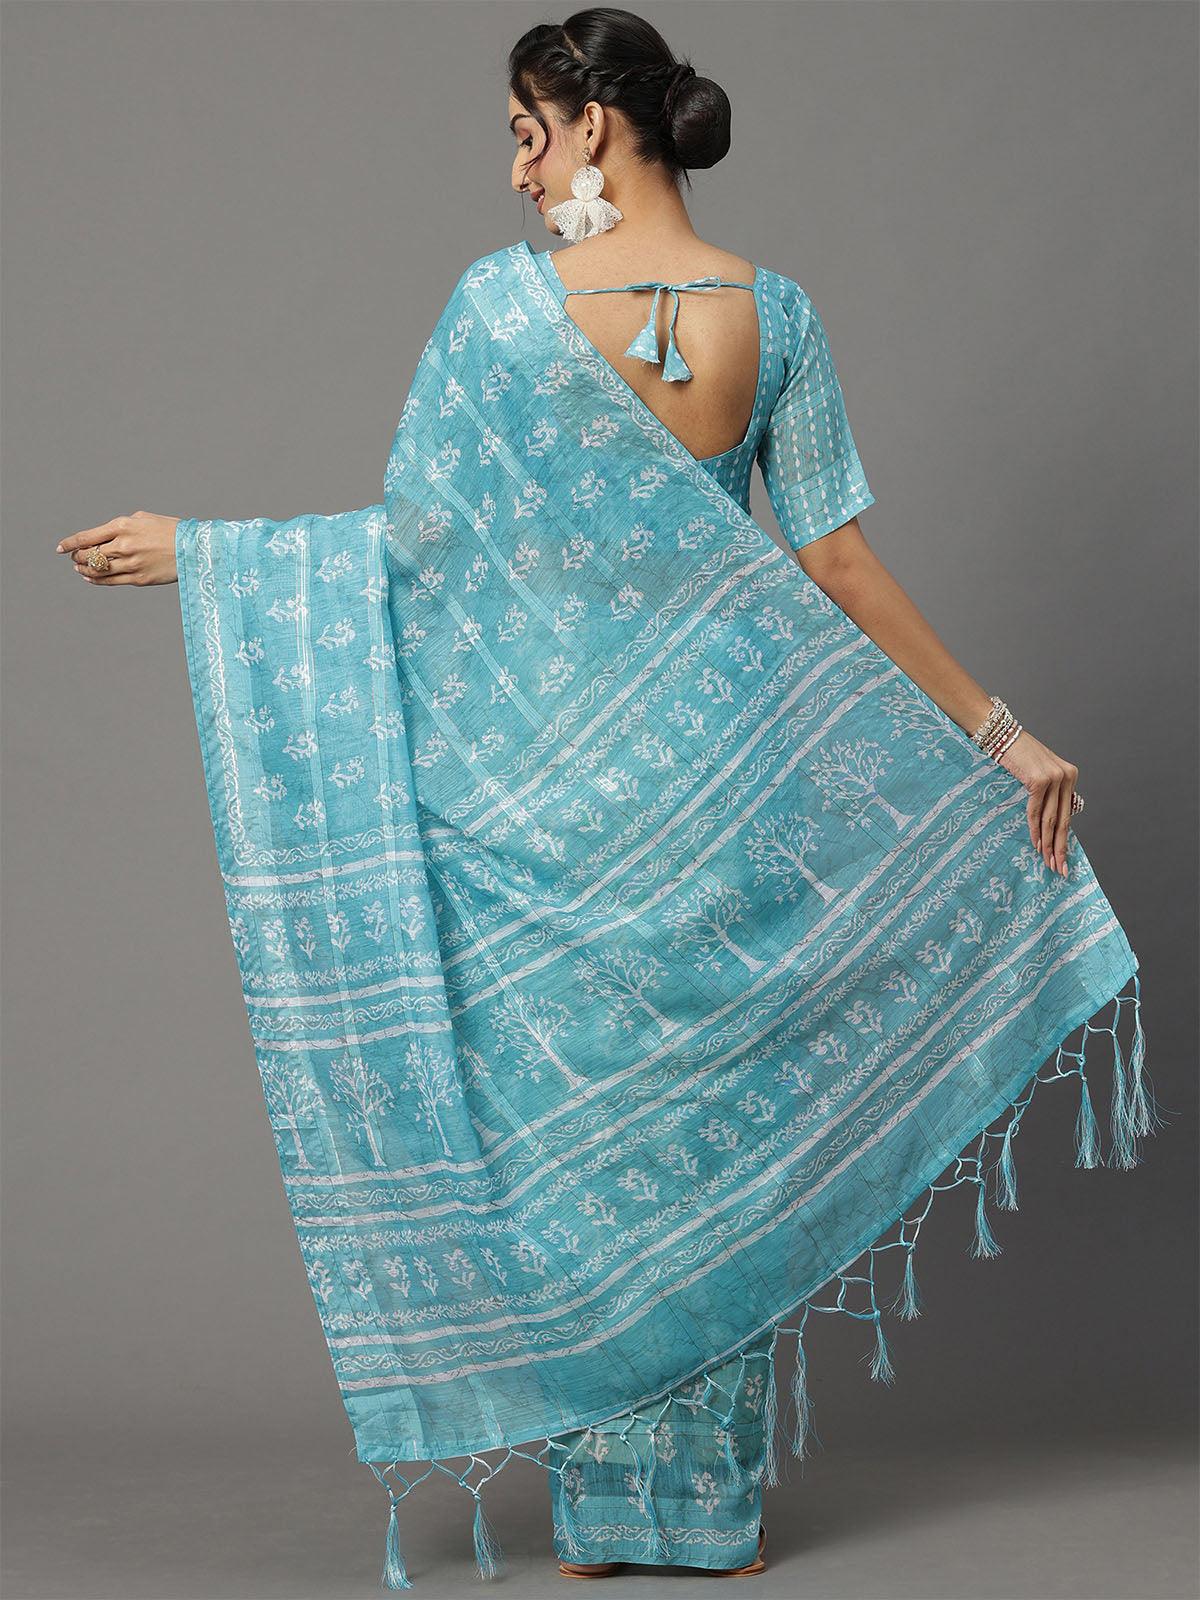 Women's Soft Silk Turquoise Printed Designer Saree With Blouse Piece - Odette